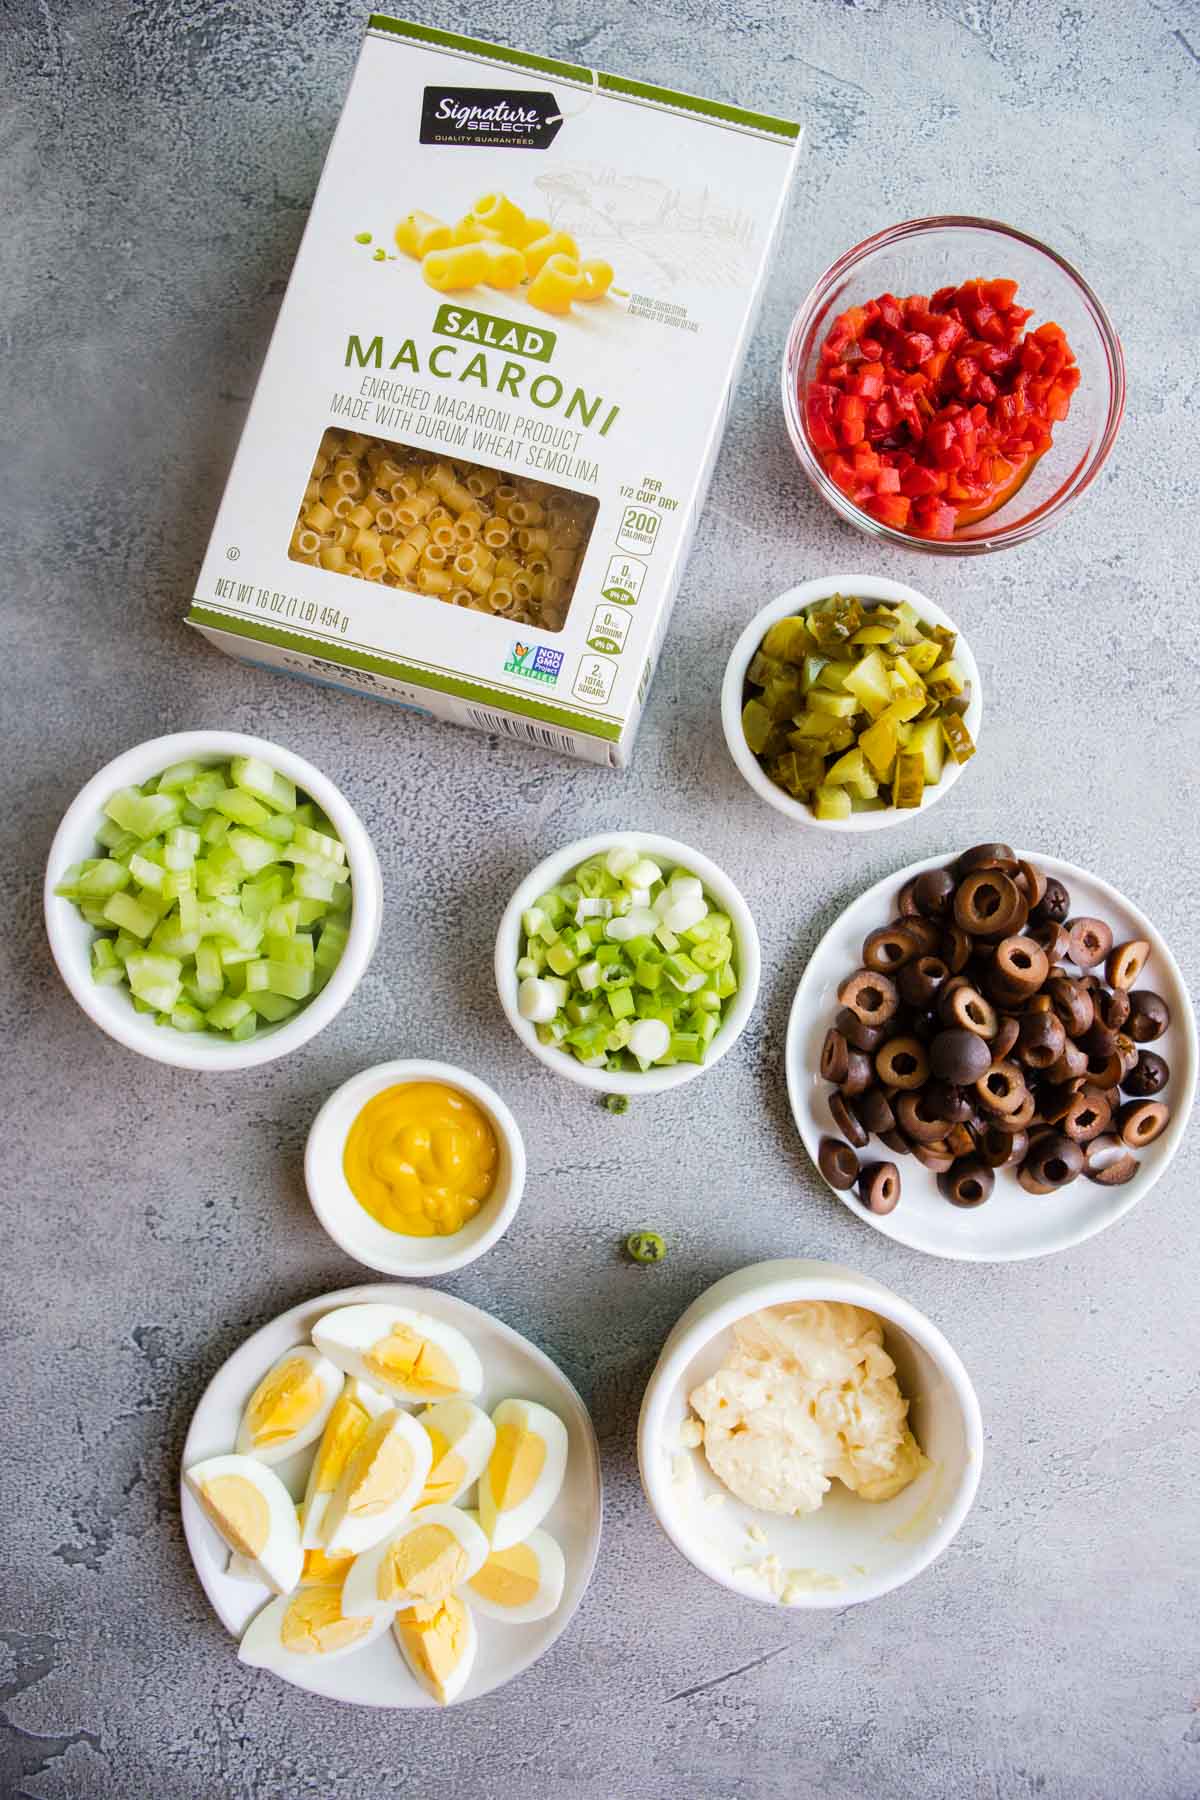 Ingredients shown are measured into bowls and used to prepare Southern Macaroni Salad.